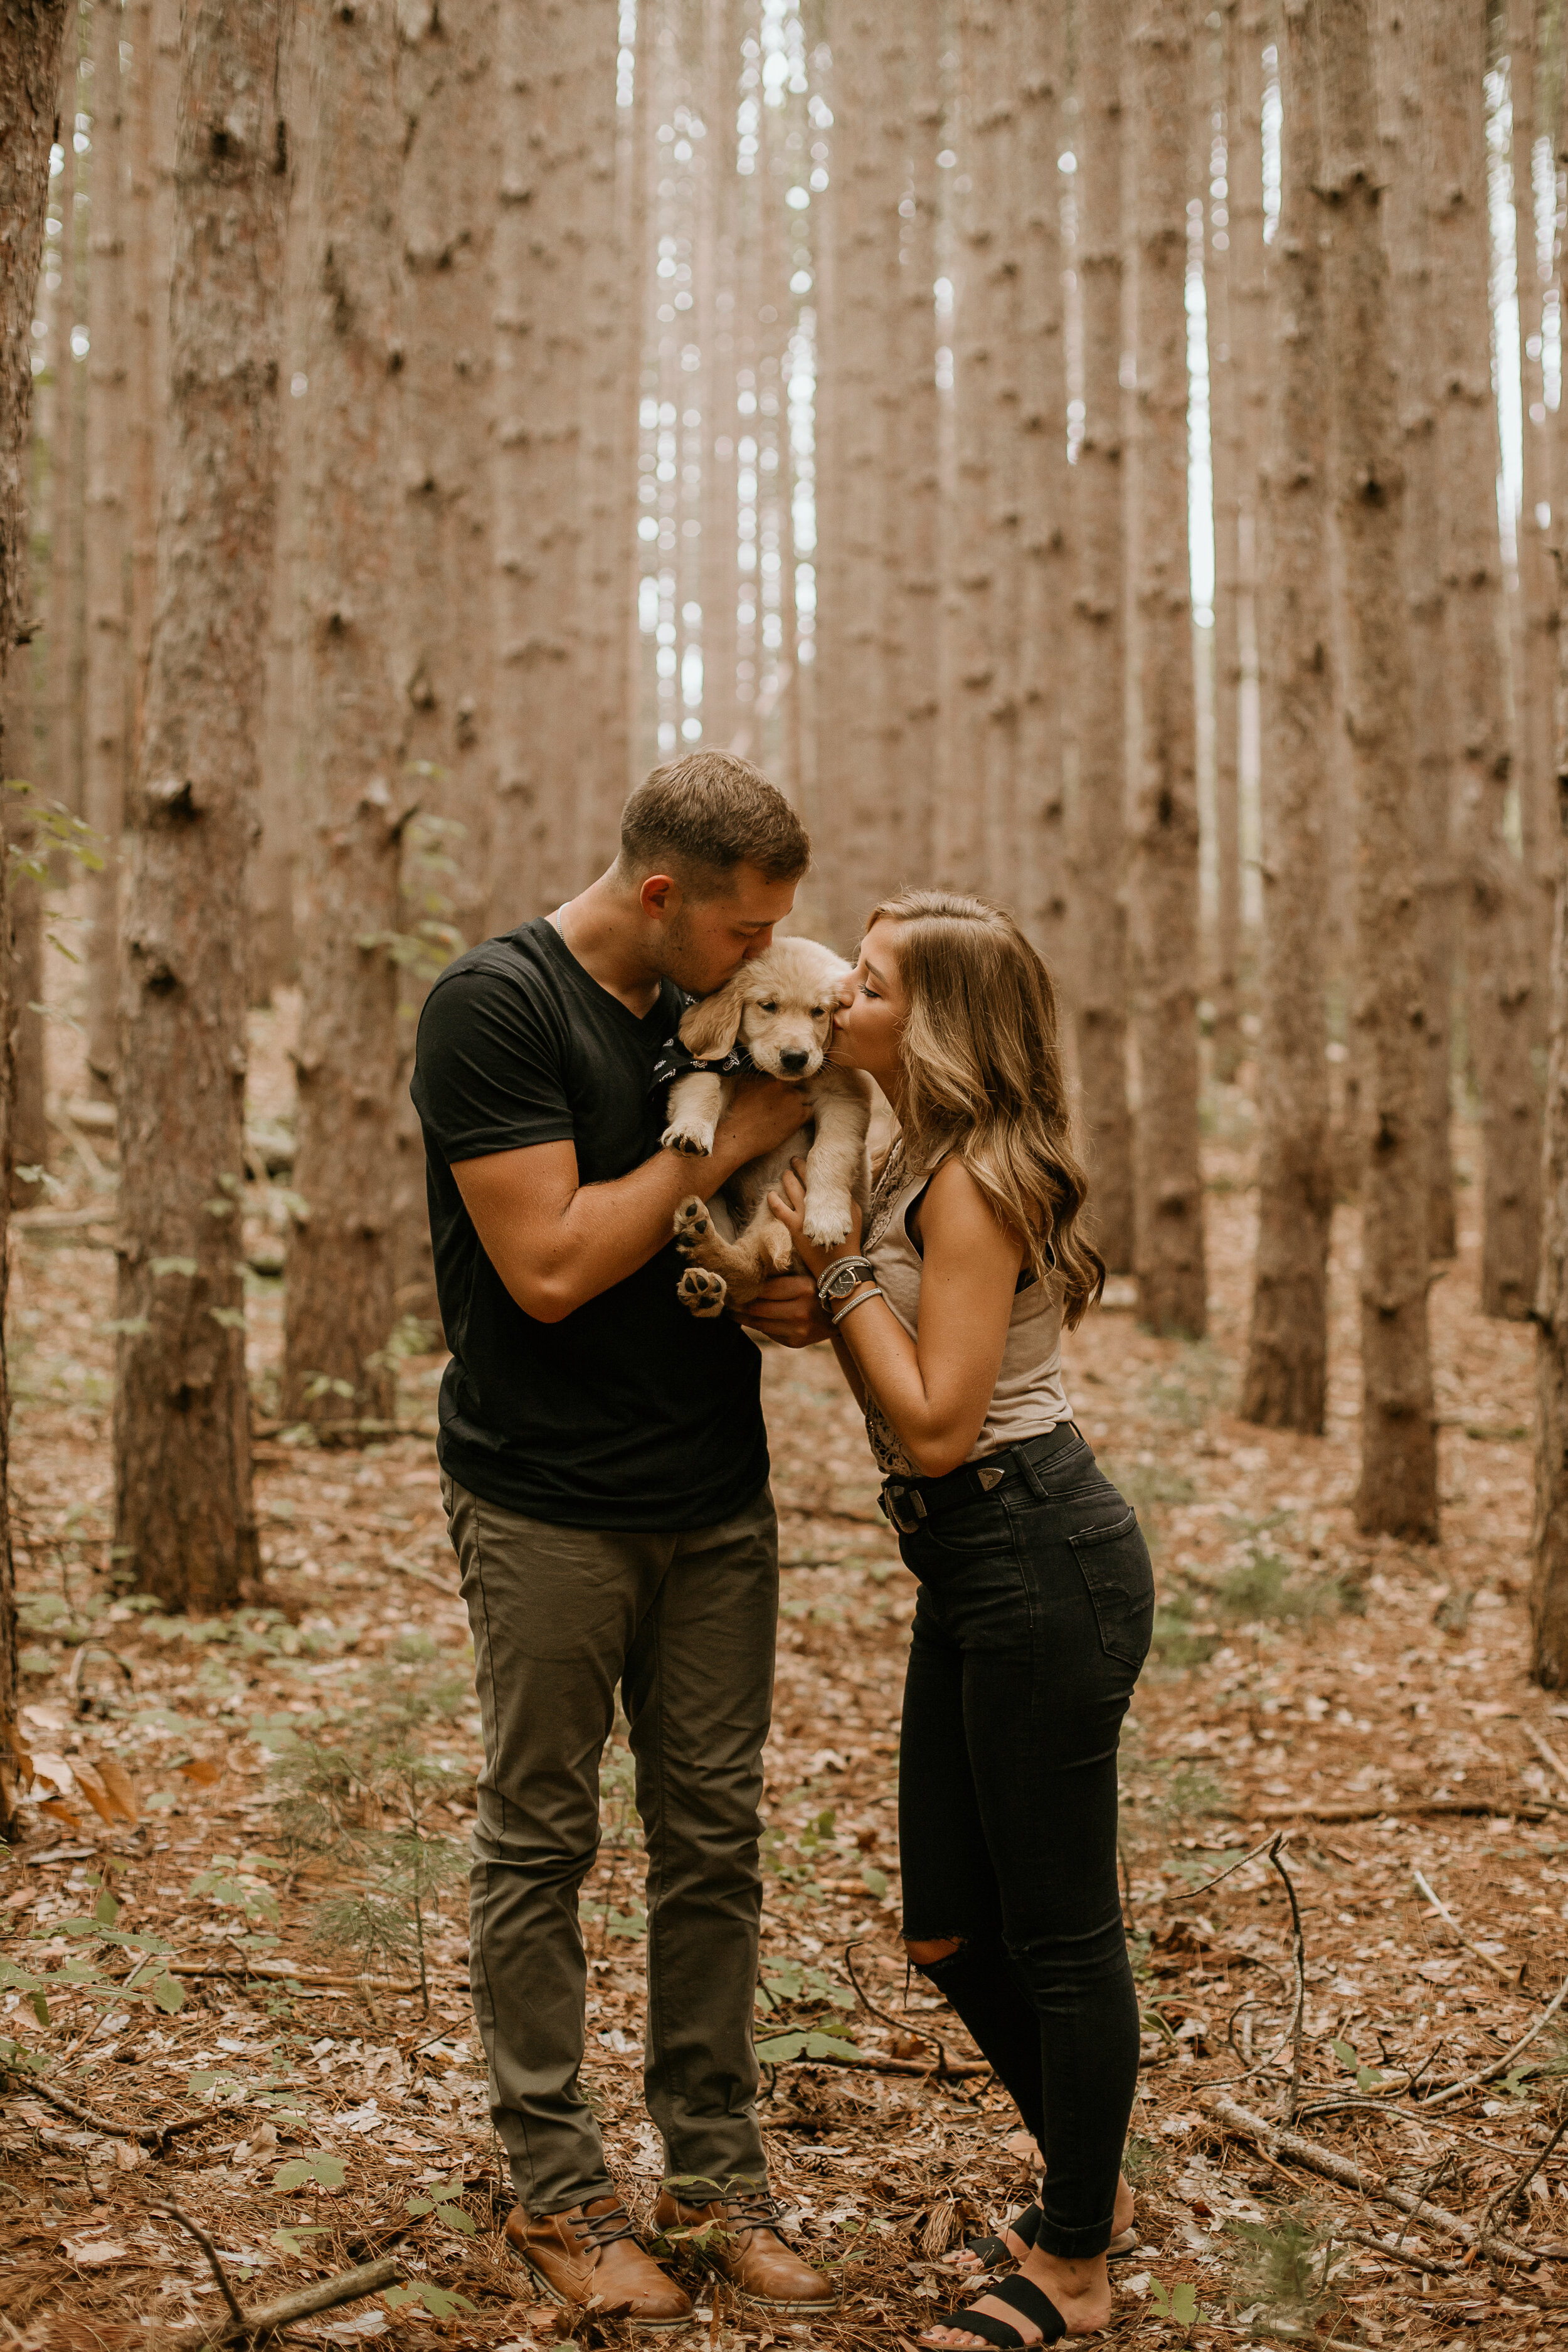 17 Tips for Choosing Your Engagement Session Outfits - Boston